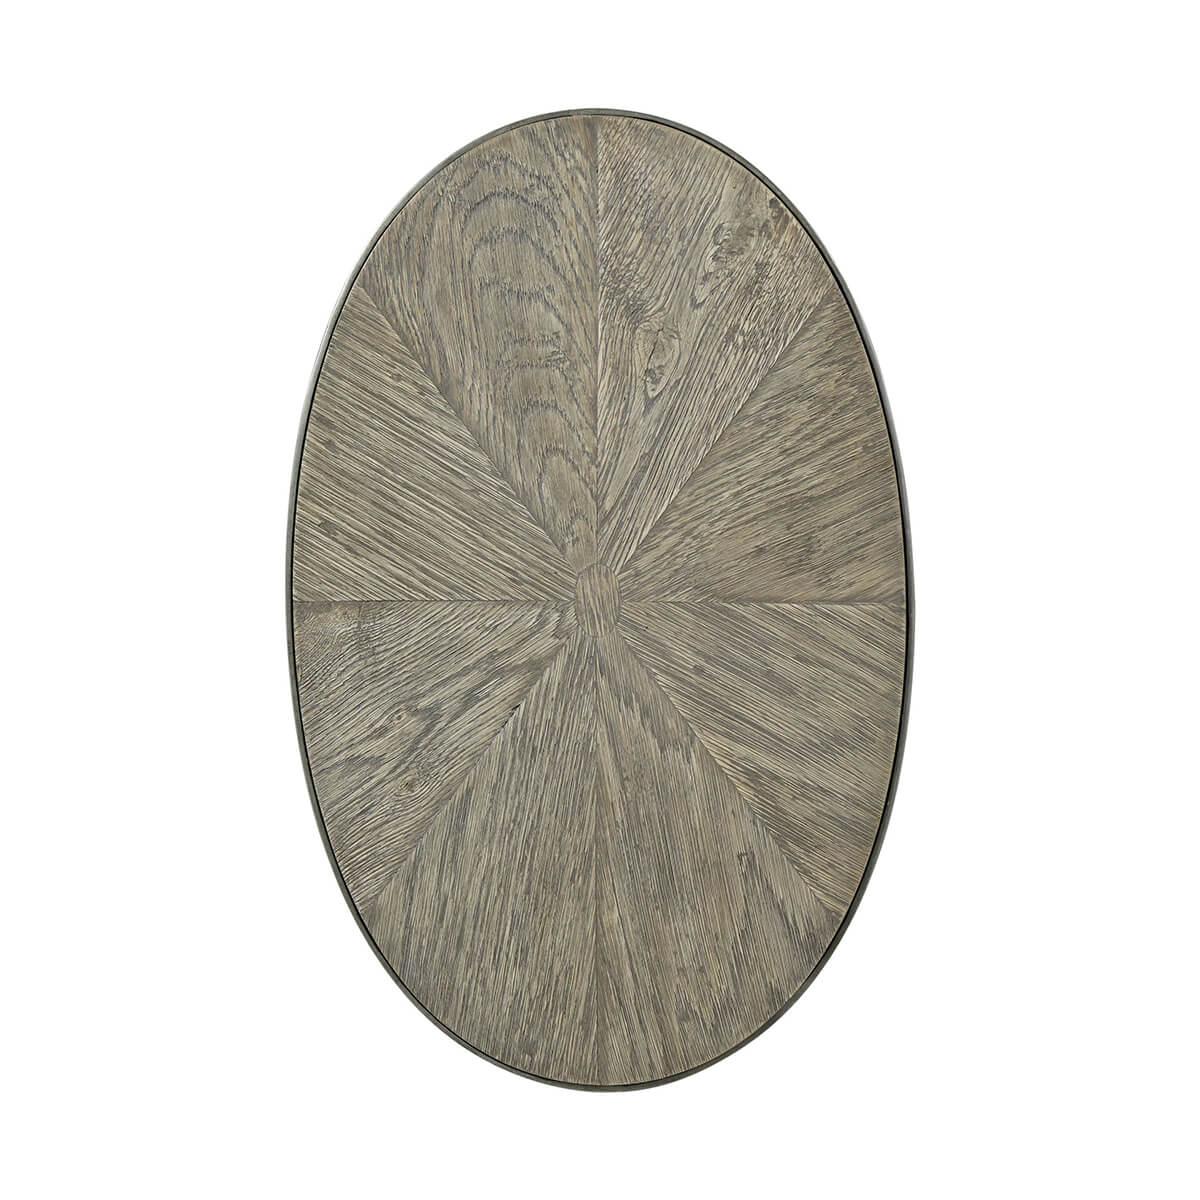 With a rustic inlaid sunburst top in a dark grey echo oak finish, an oval cantilever form with a 'vintage' metal open frame base.

Dimensions: 14